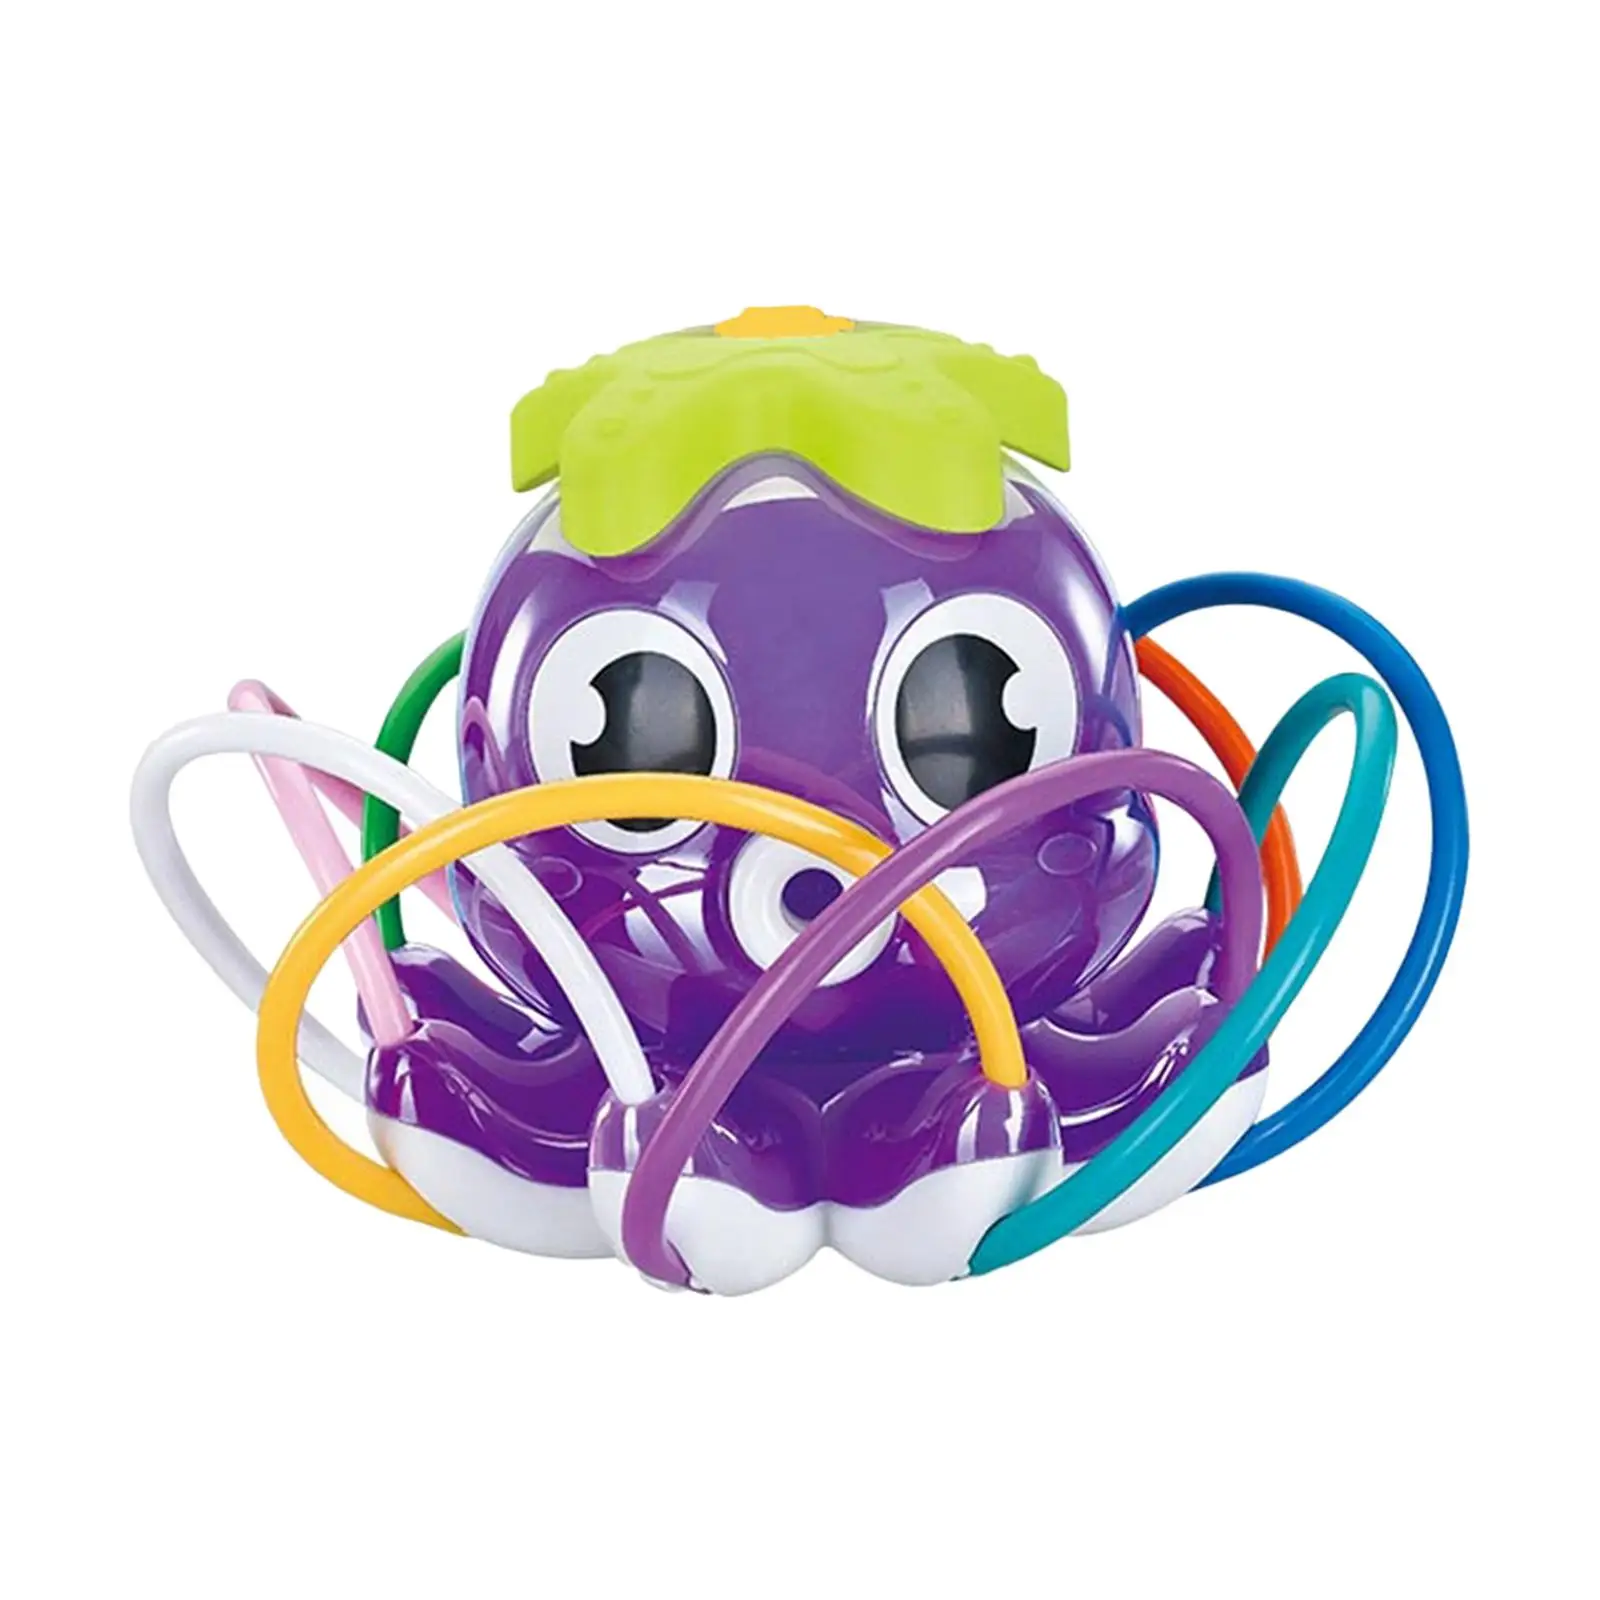 Octopus Water Garden Watering Toy Water Pressure Control for Pool Beach